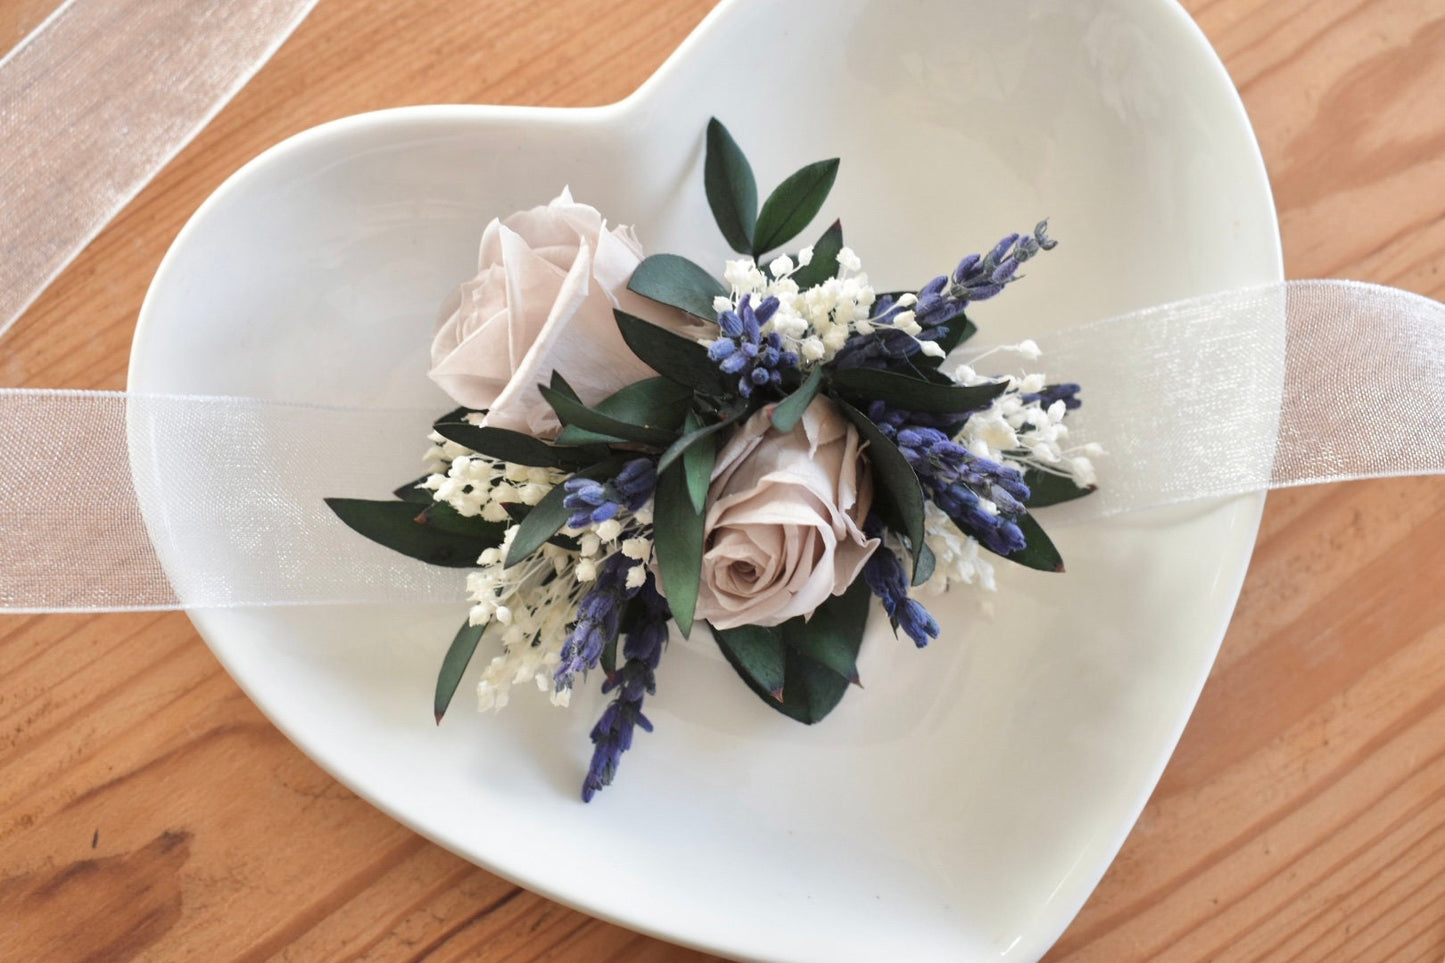 Lavender and rose wrist corsage